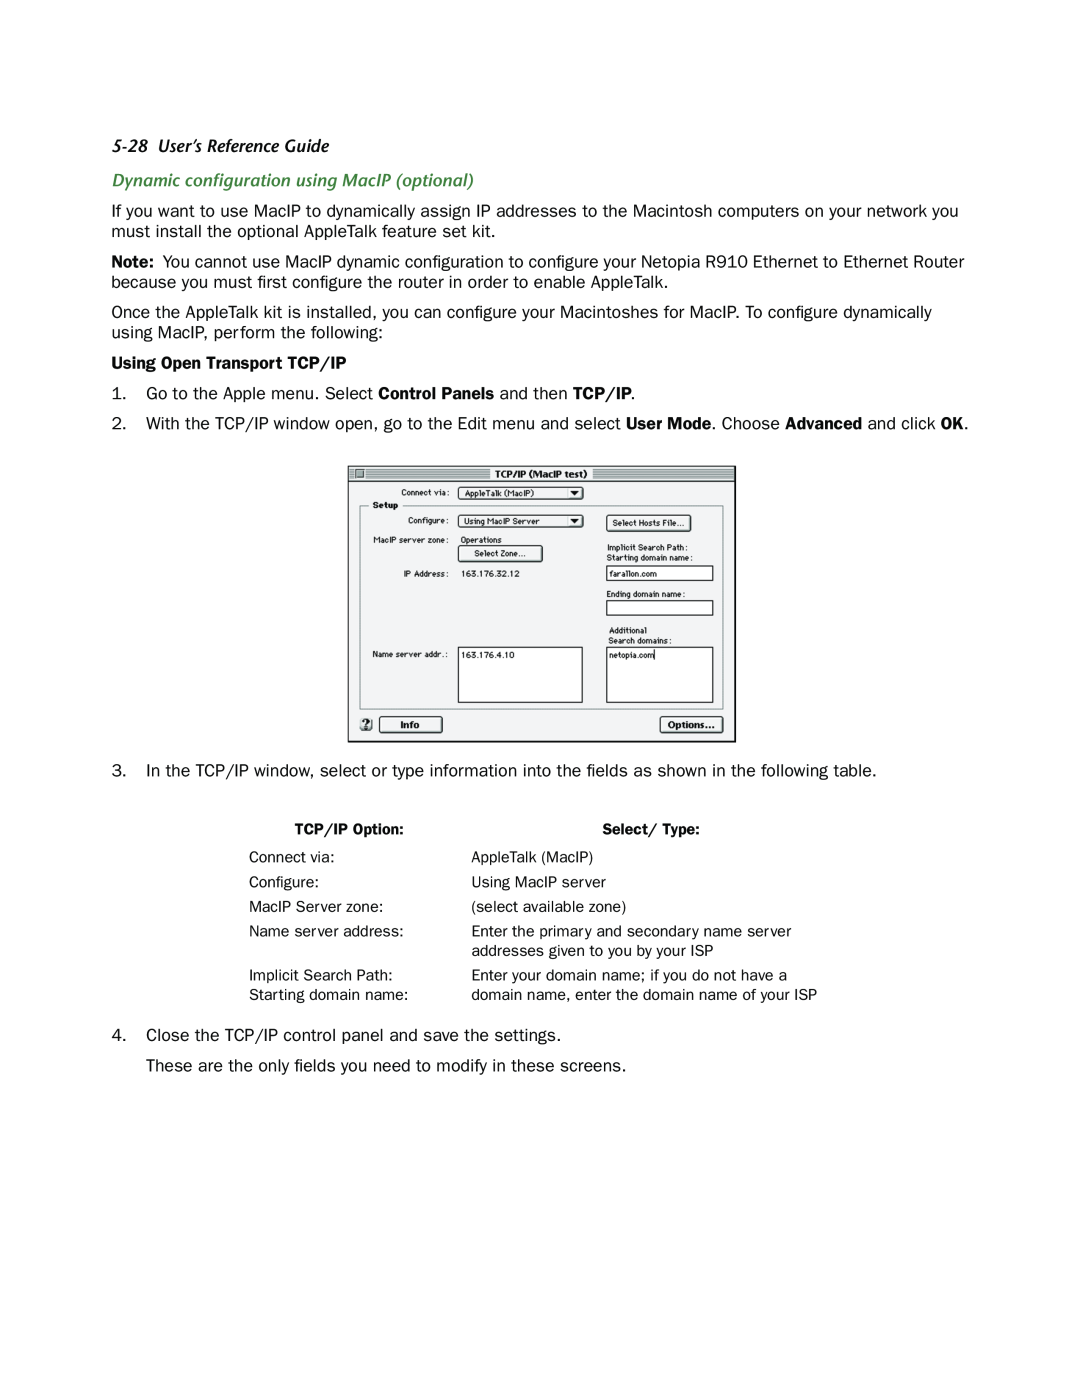 Netopia R910 manual User’s Reference Guide, Dynamic conﬁguration using MacIP optional 